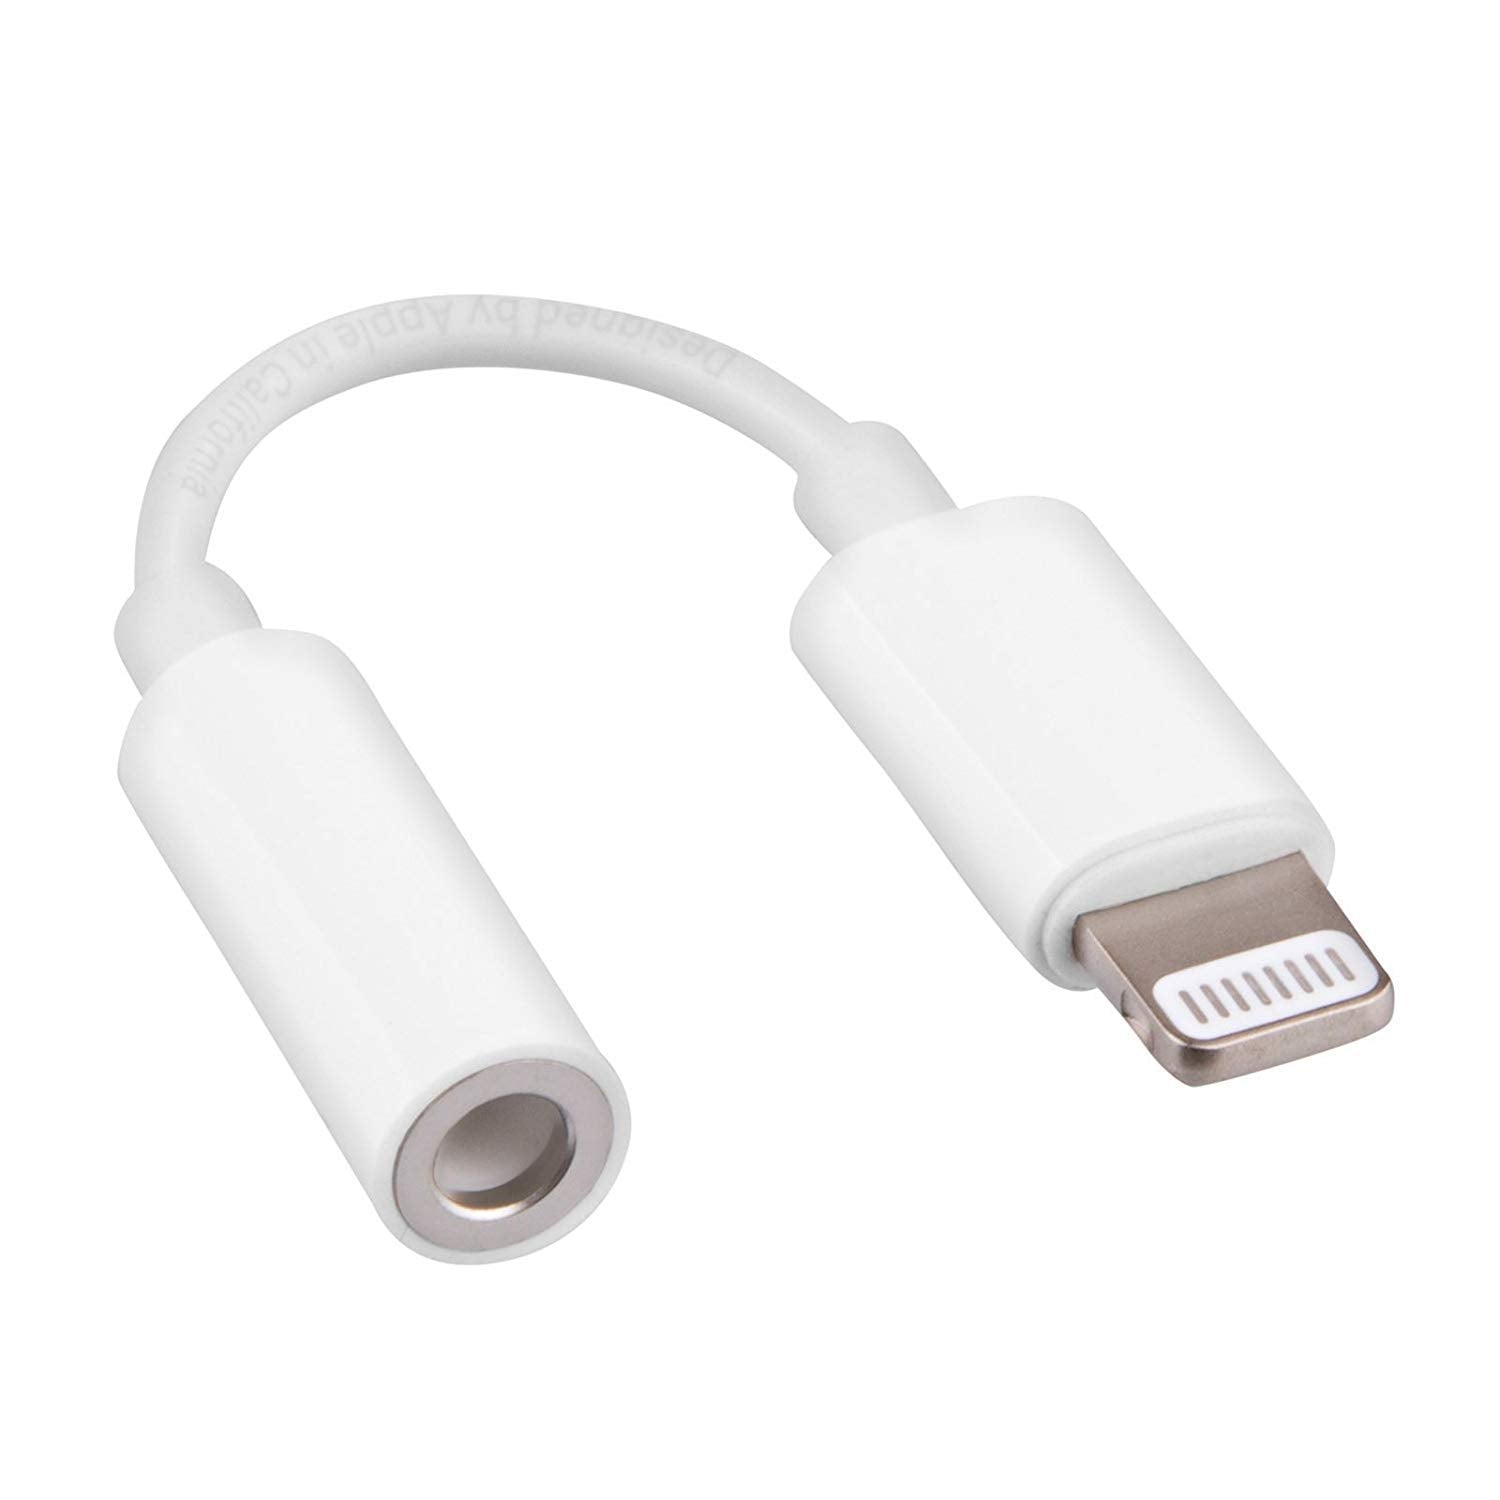 Apple iPhone 5C Heaphone Jack Connector (Lightning to 3.5mm)